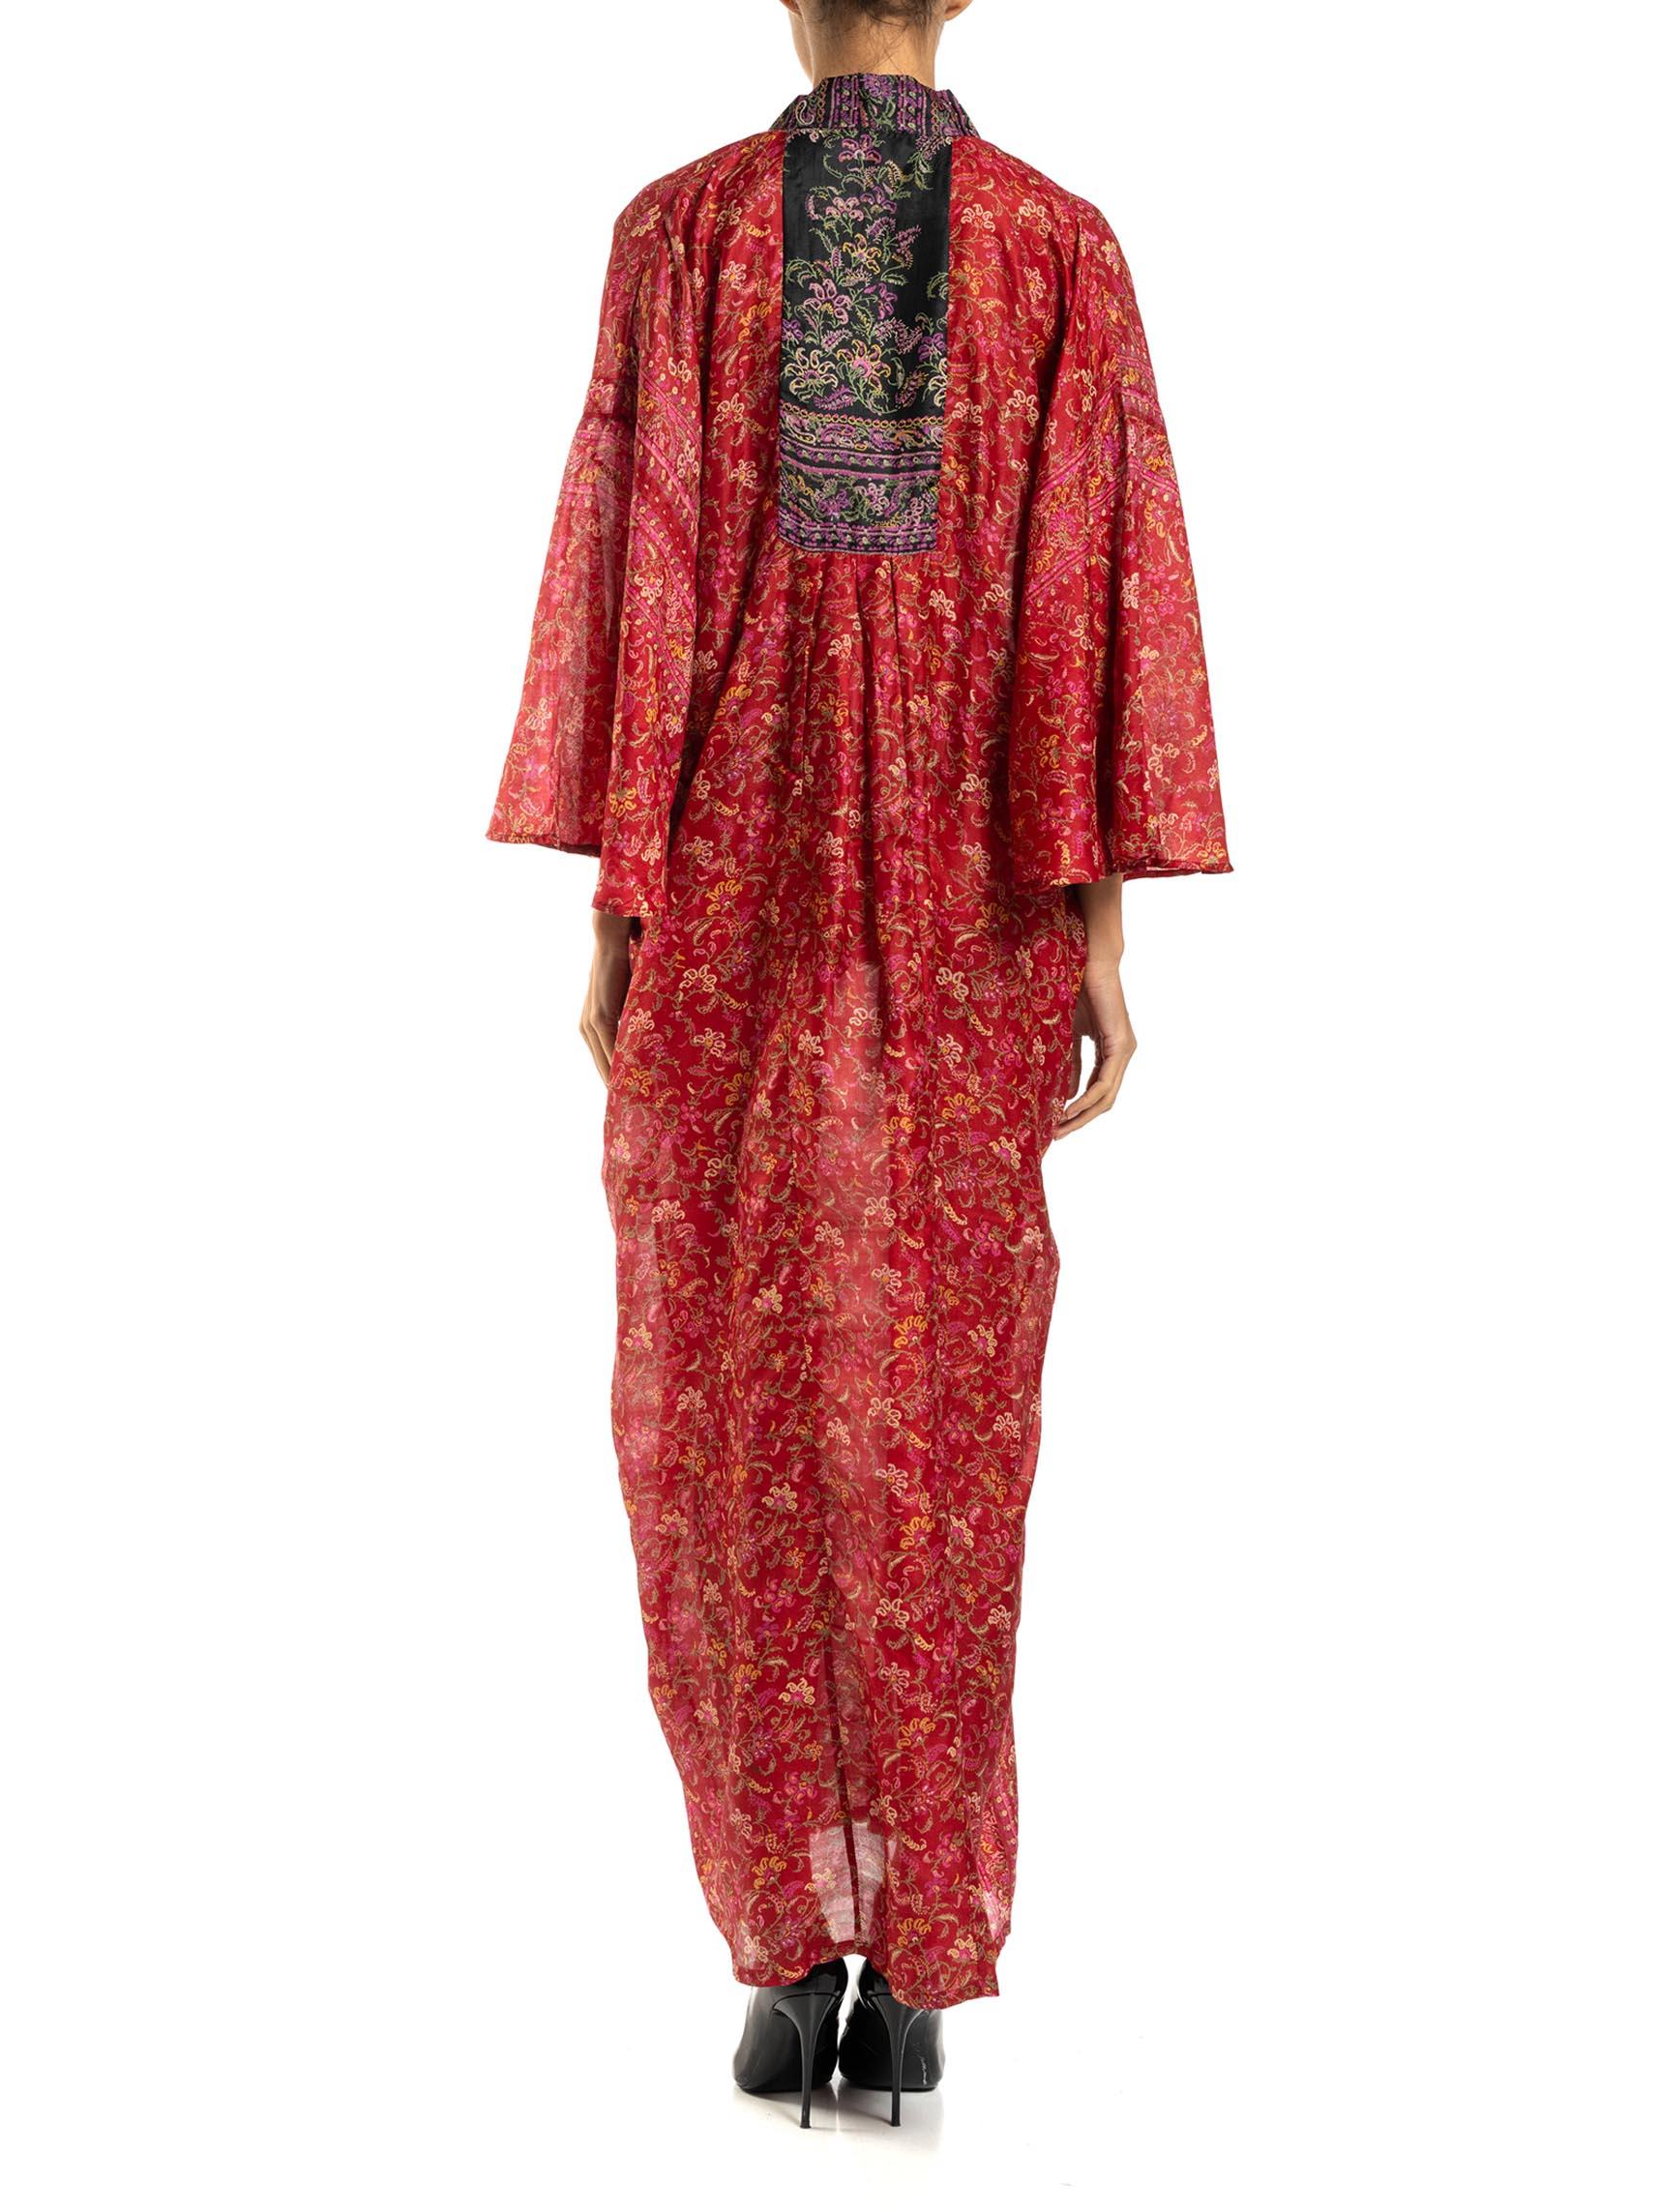 MORPHEW COLLECTION Red & Black Paisley Silk Floral Kaftan Made From Vintage Sari For Sale 5